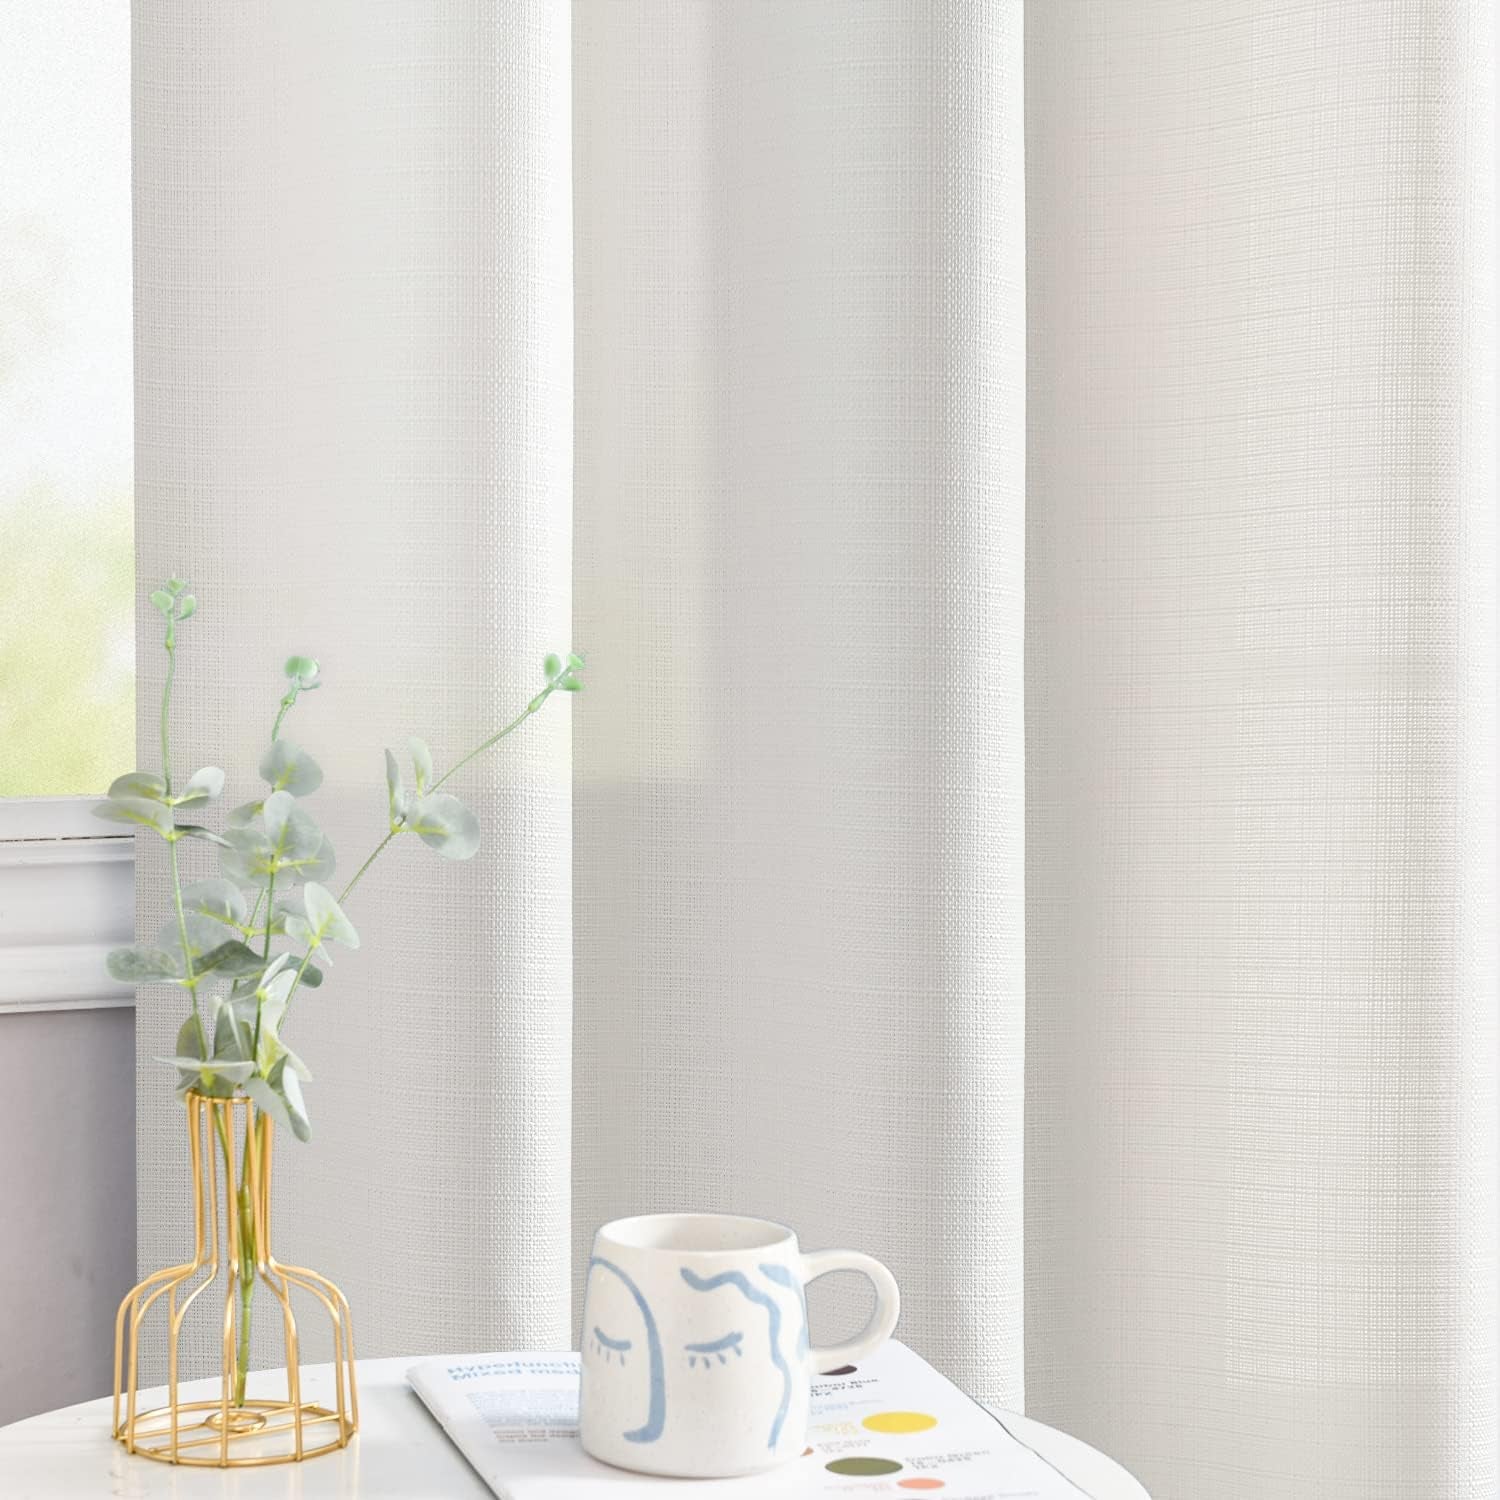 COLLACT White Linen Textured Curtains 84 Inch Length 2 Panels for Living Room Casual Weave Light Filtering Semi Sheer Curtains & Drapes for Bedroom Grommet Top Window Treatments, W38 X L84, White  COLLACT   